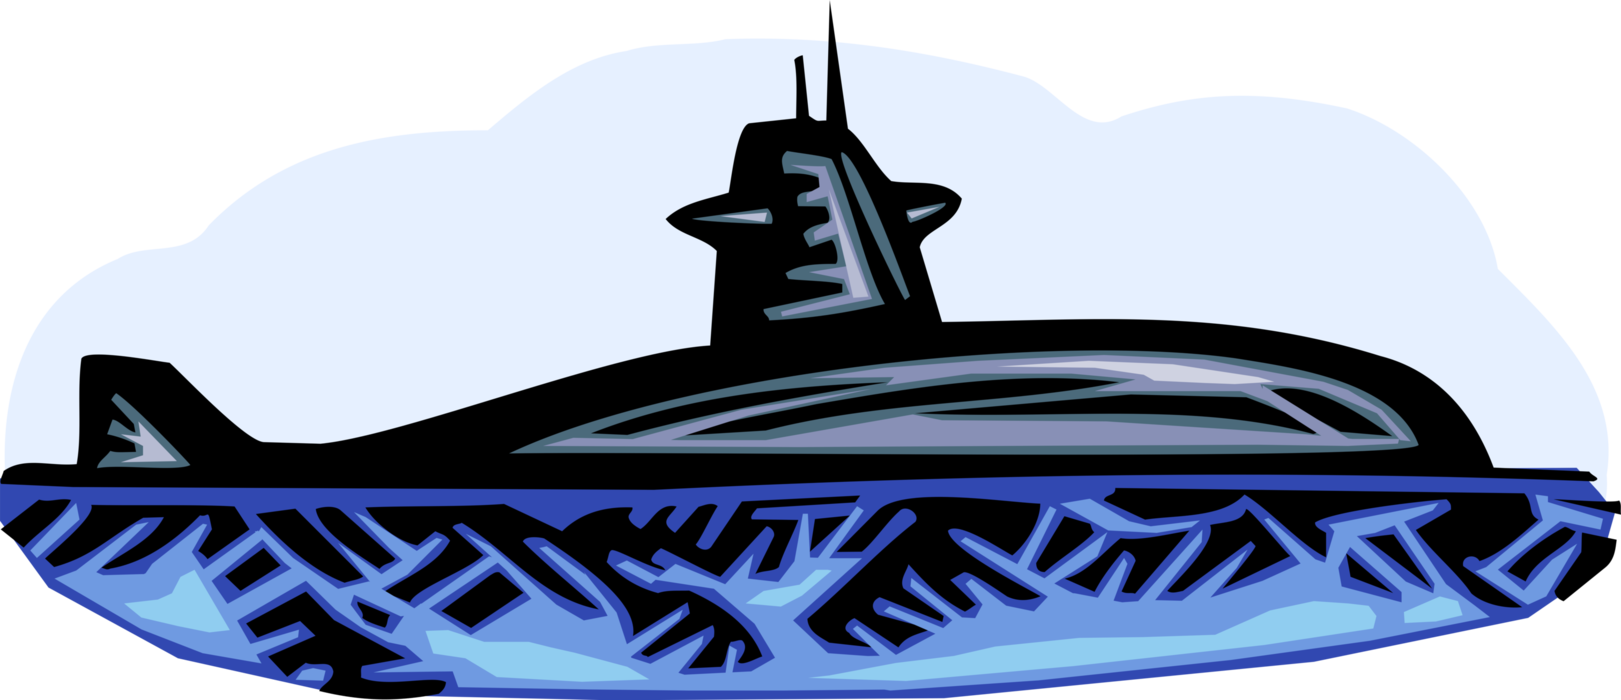 Vector Illustration of Navy Submersible Submarine Armed with Torpedoes or Guided Missiles